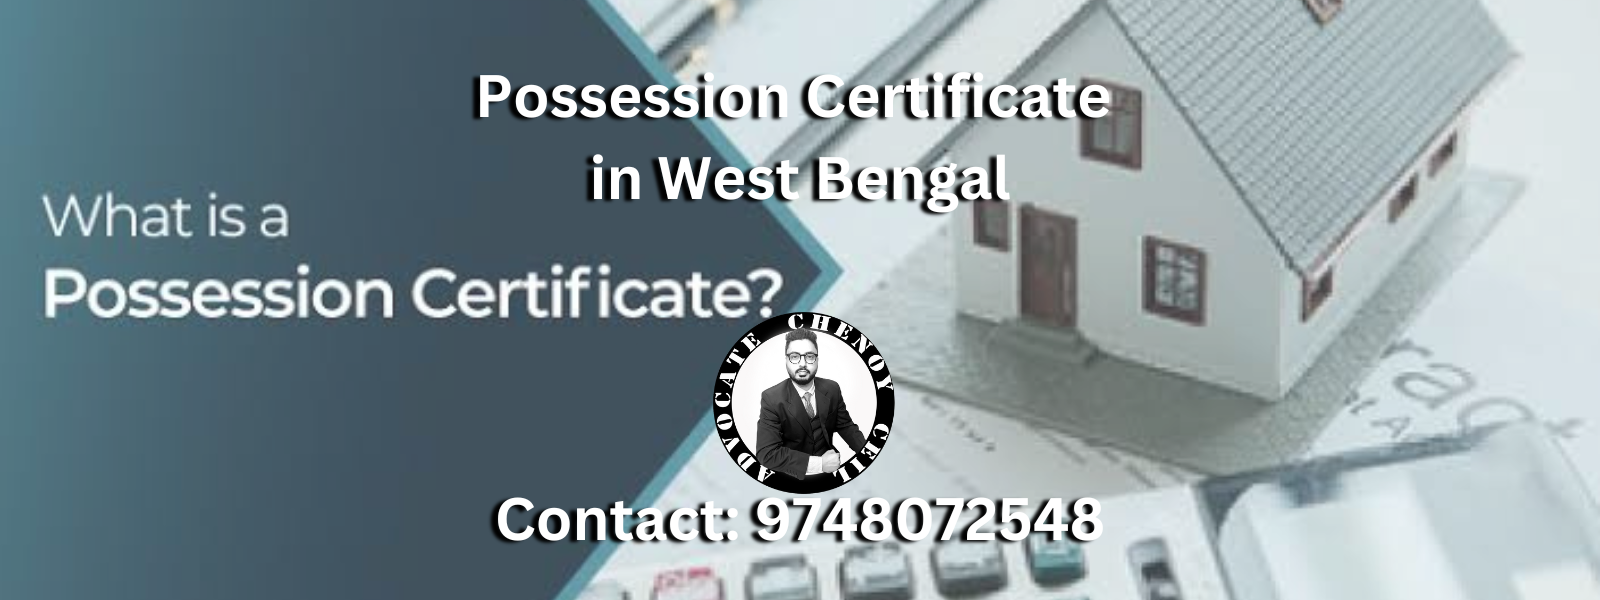 Possession Certificate in West Bengal